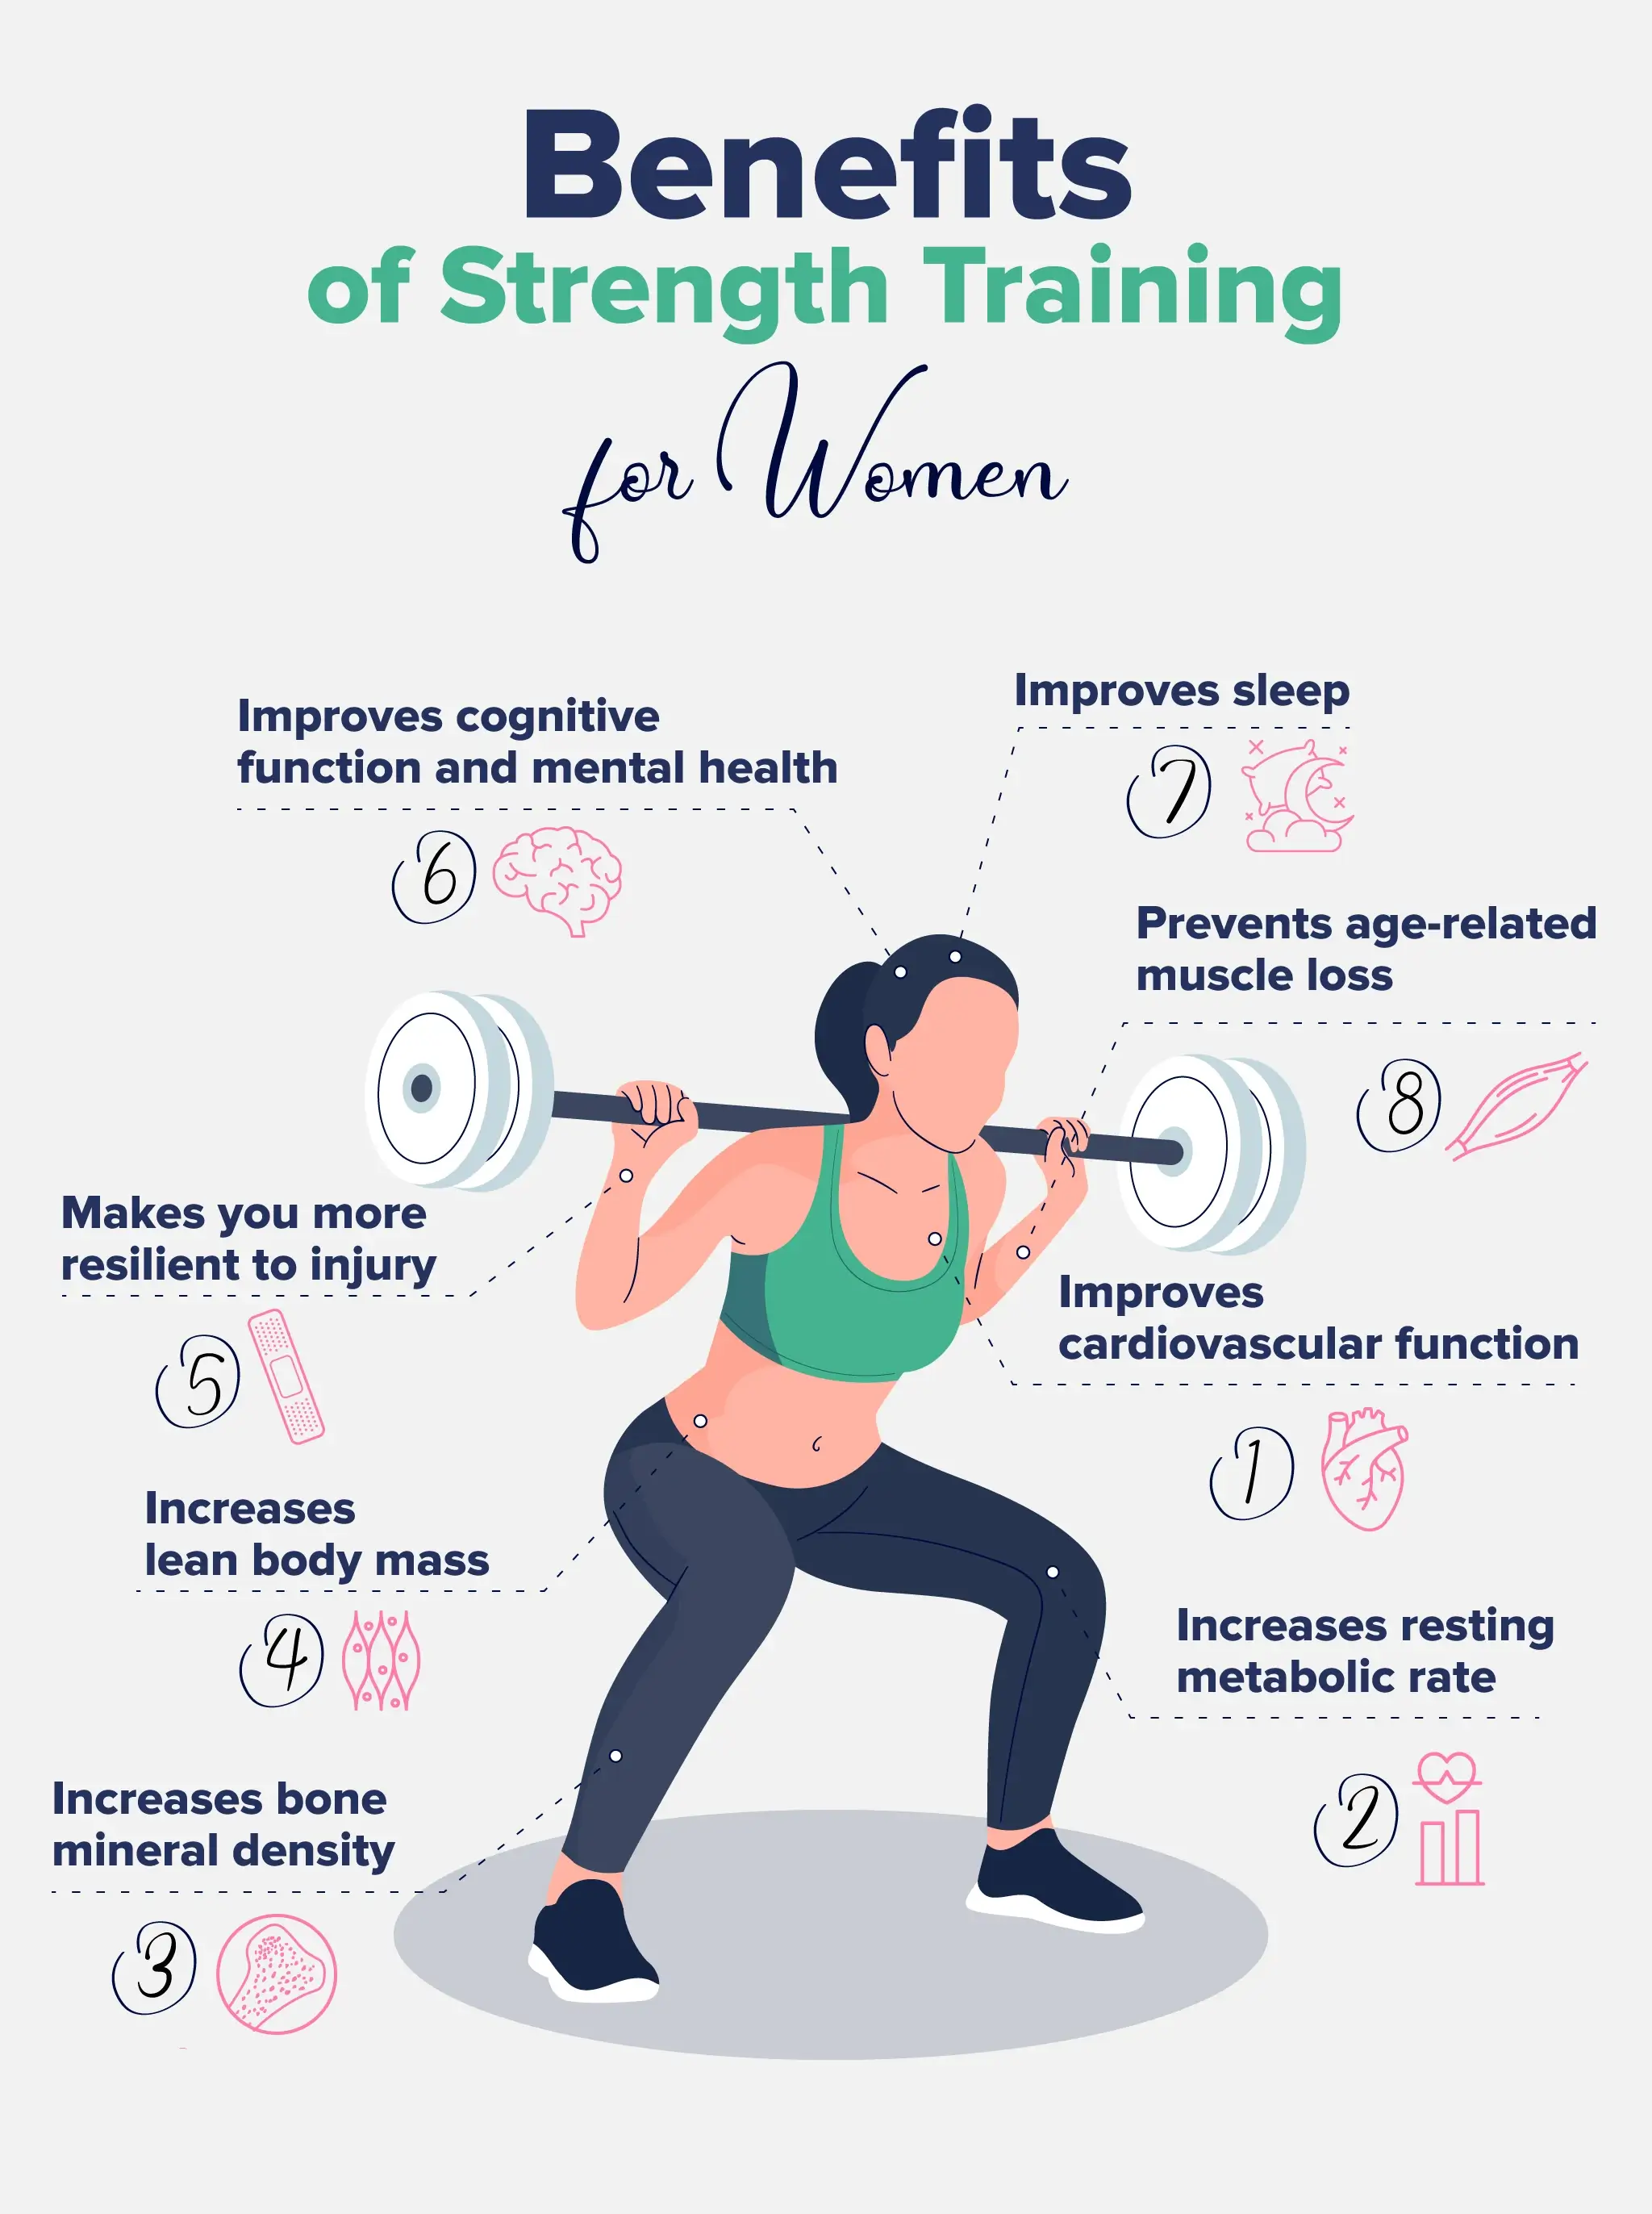 list of heal benefits of Strength Training for Women